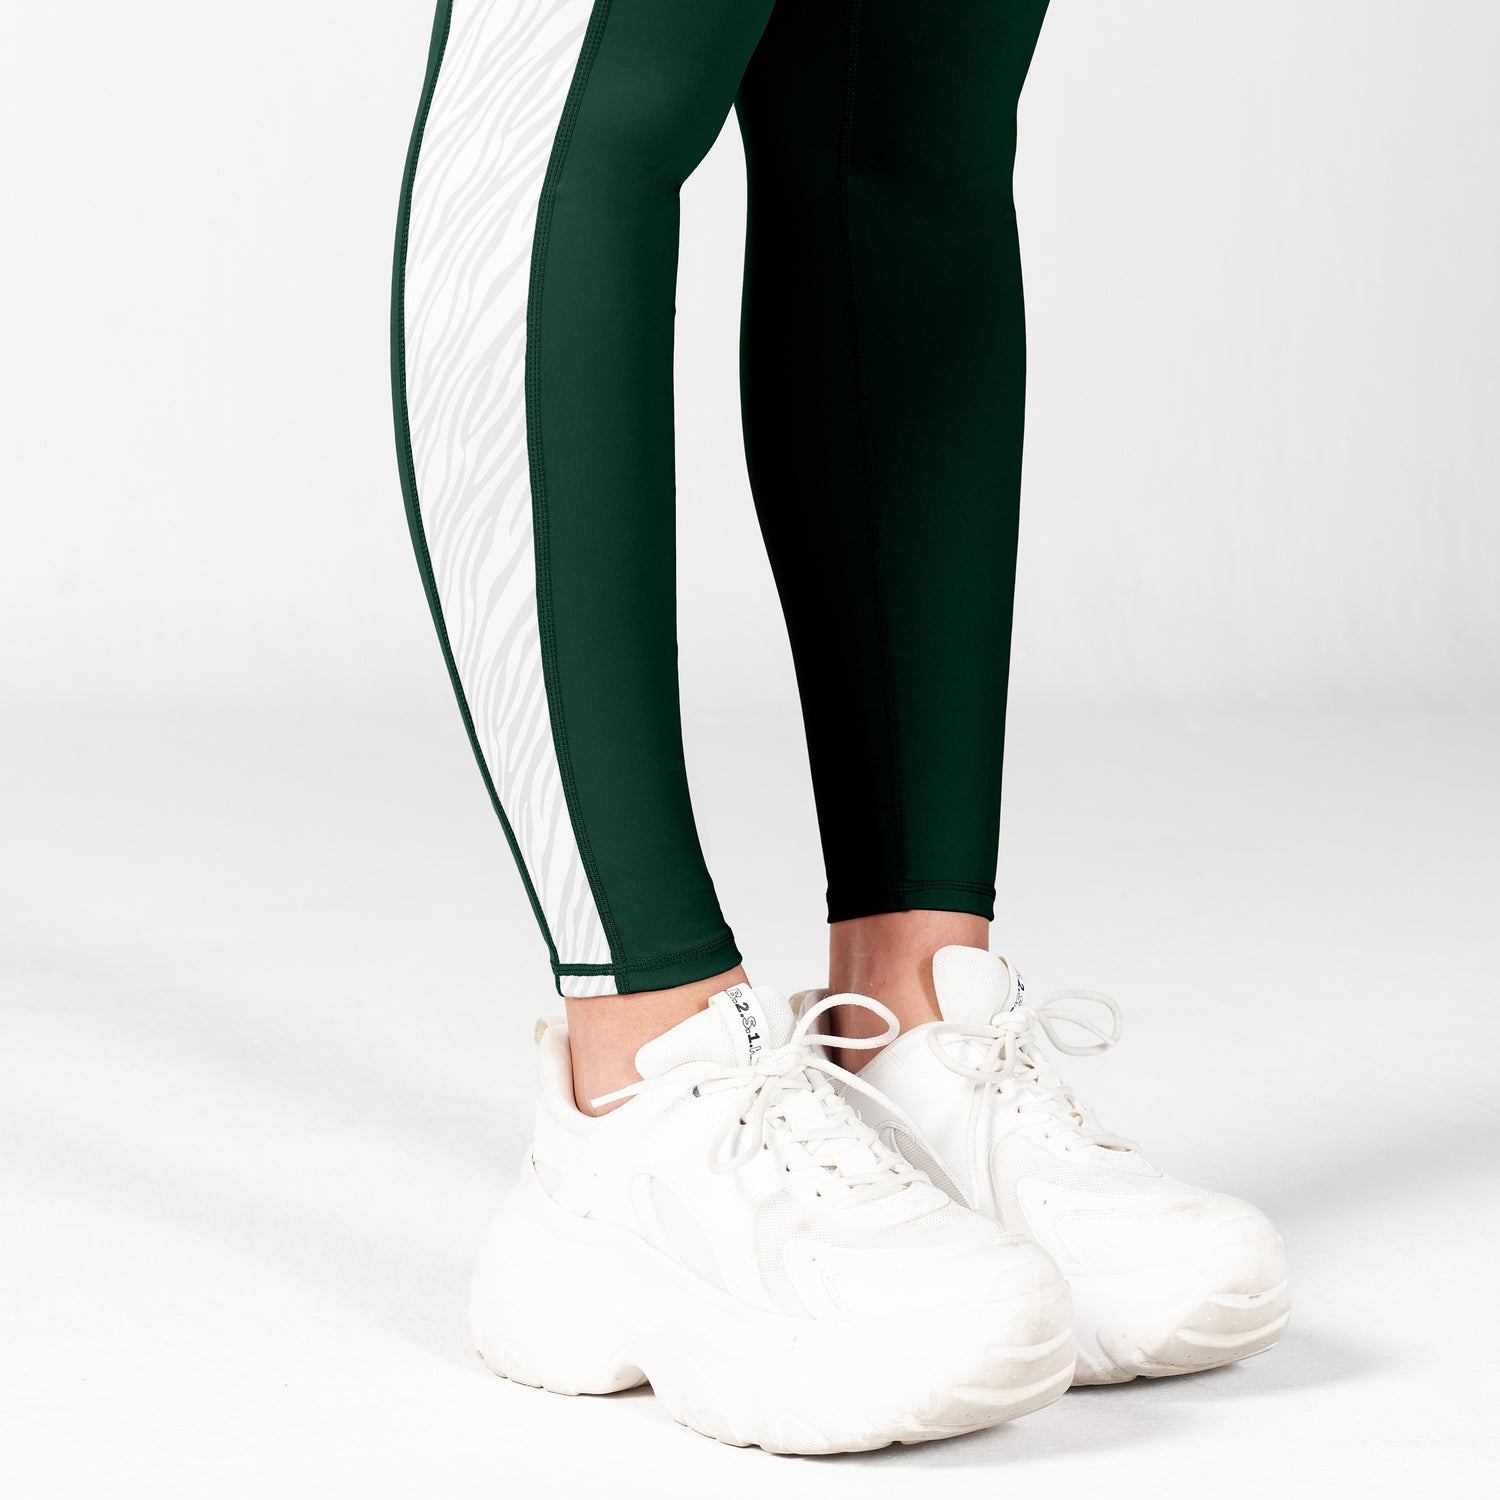 squatwolf-workout-clothes-core-wild-panel-leggings-green-gym-leggings-for-women